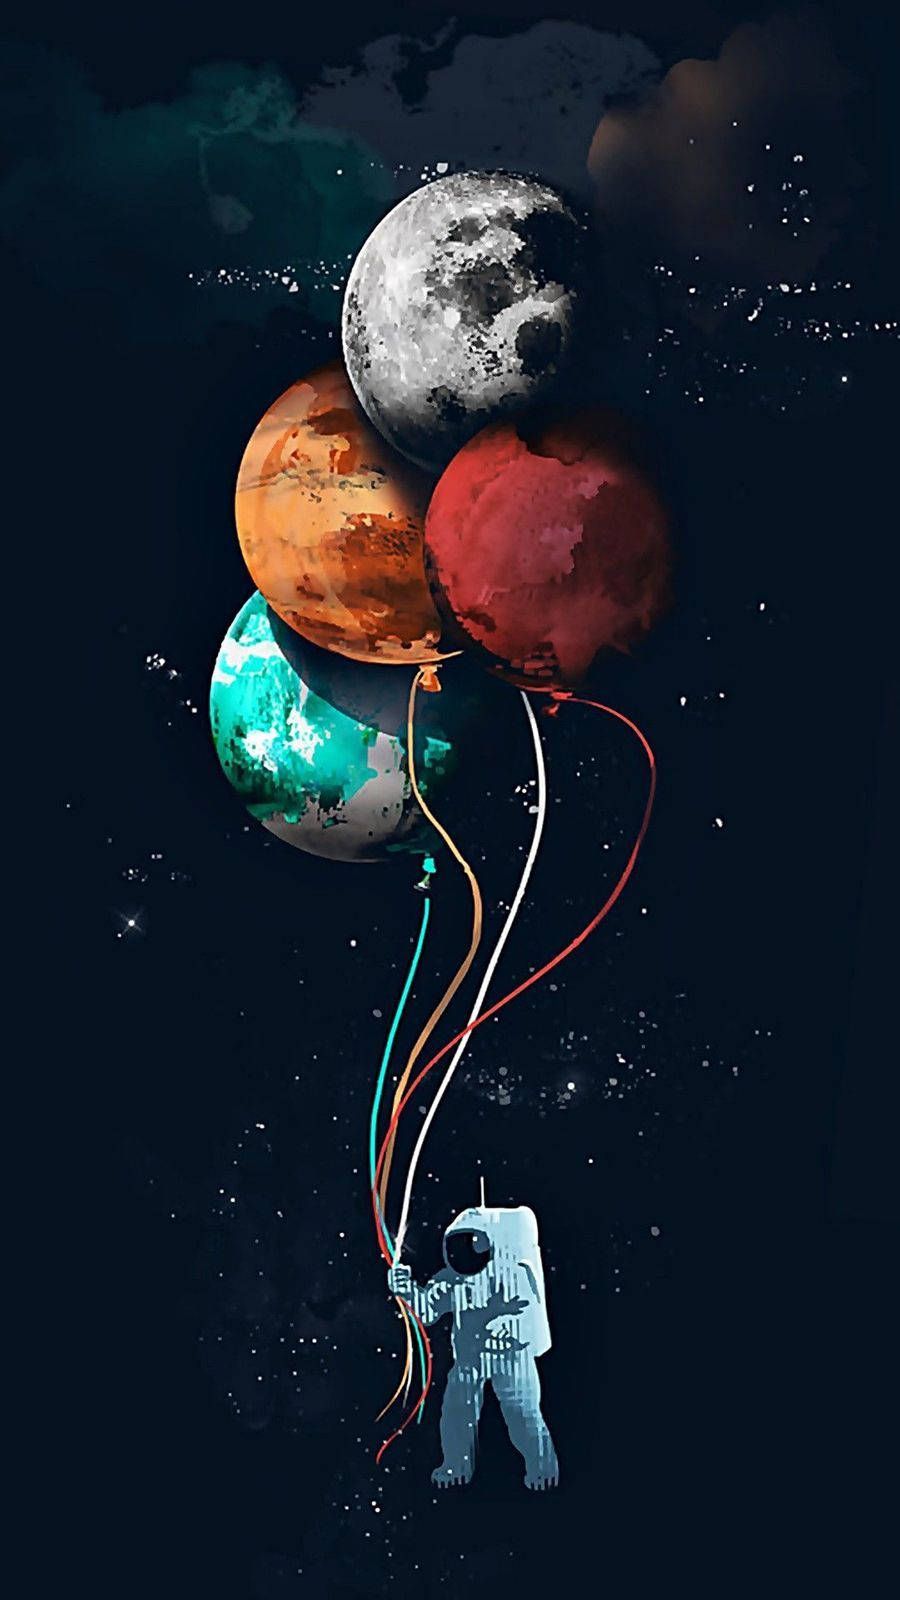 IPhone wallpaper of an astronaut holding balloons that look like planets - Balloons